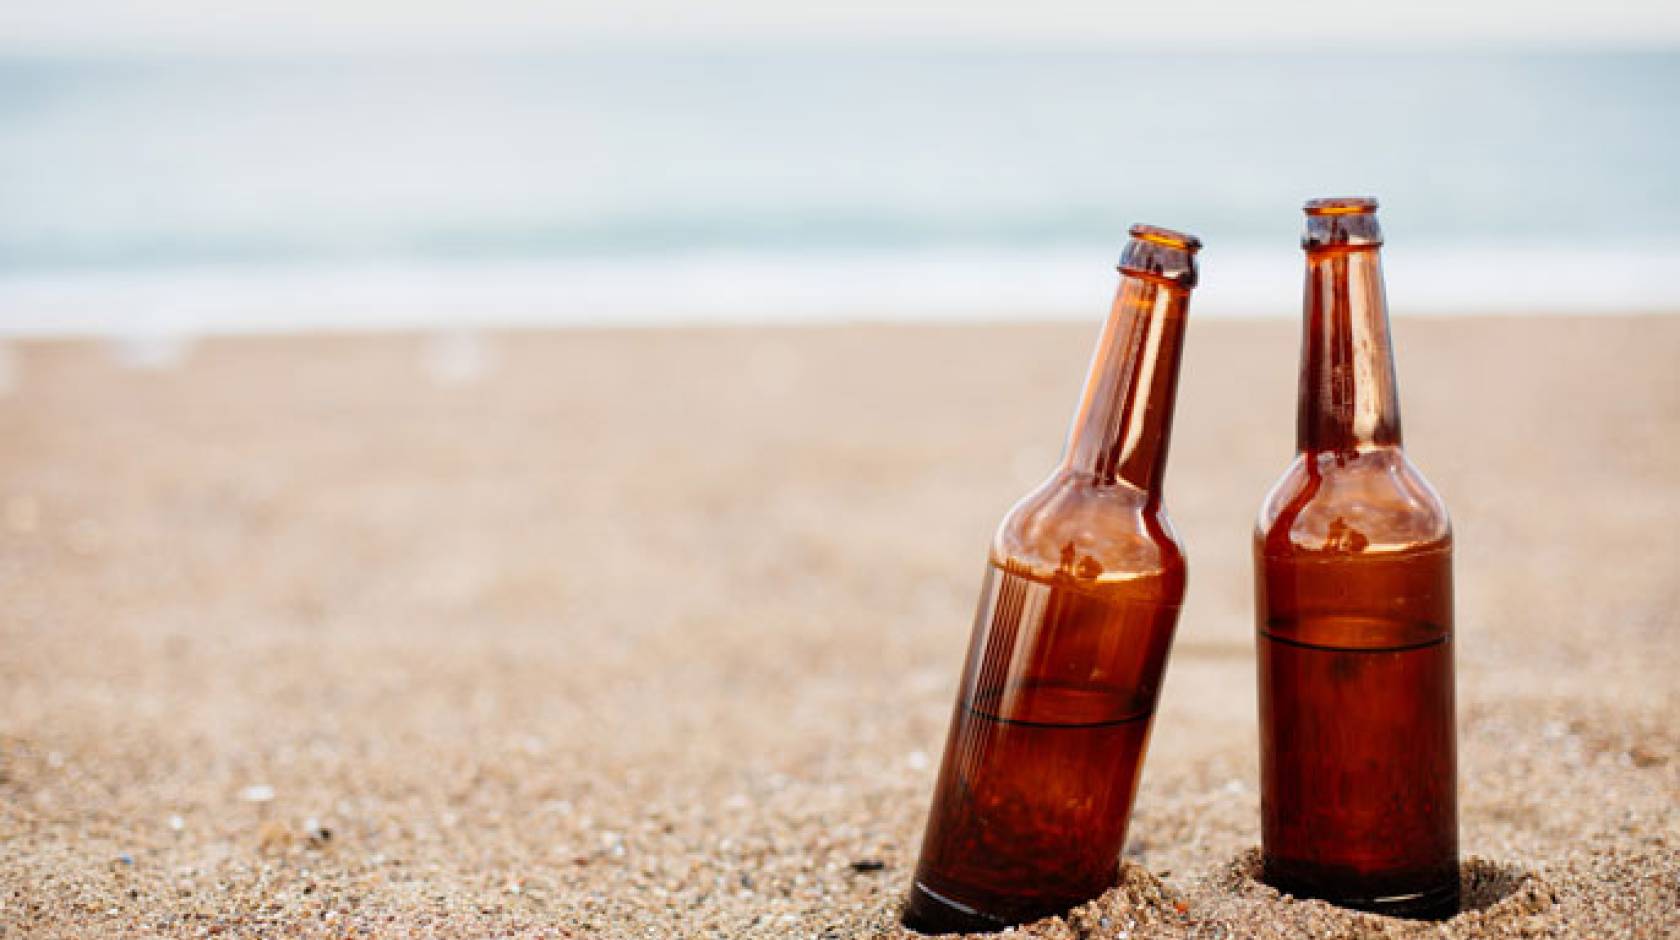 Two half-full beers on a sandy beach